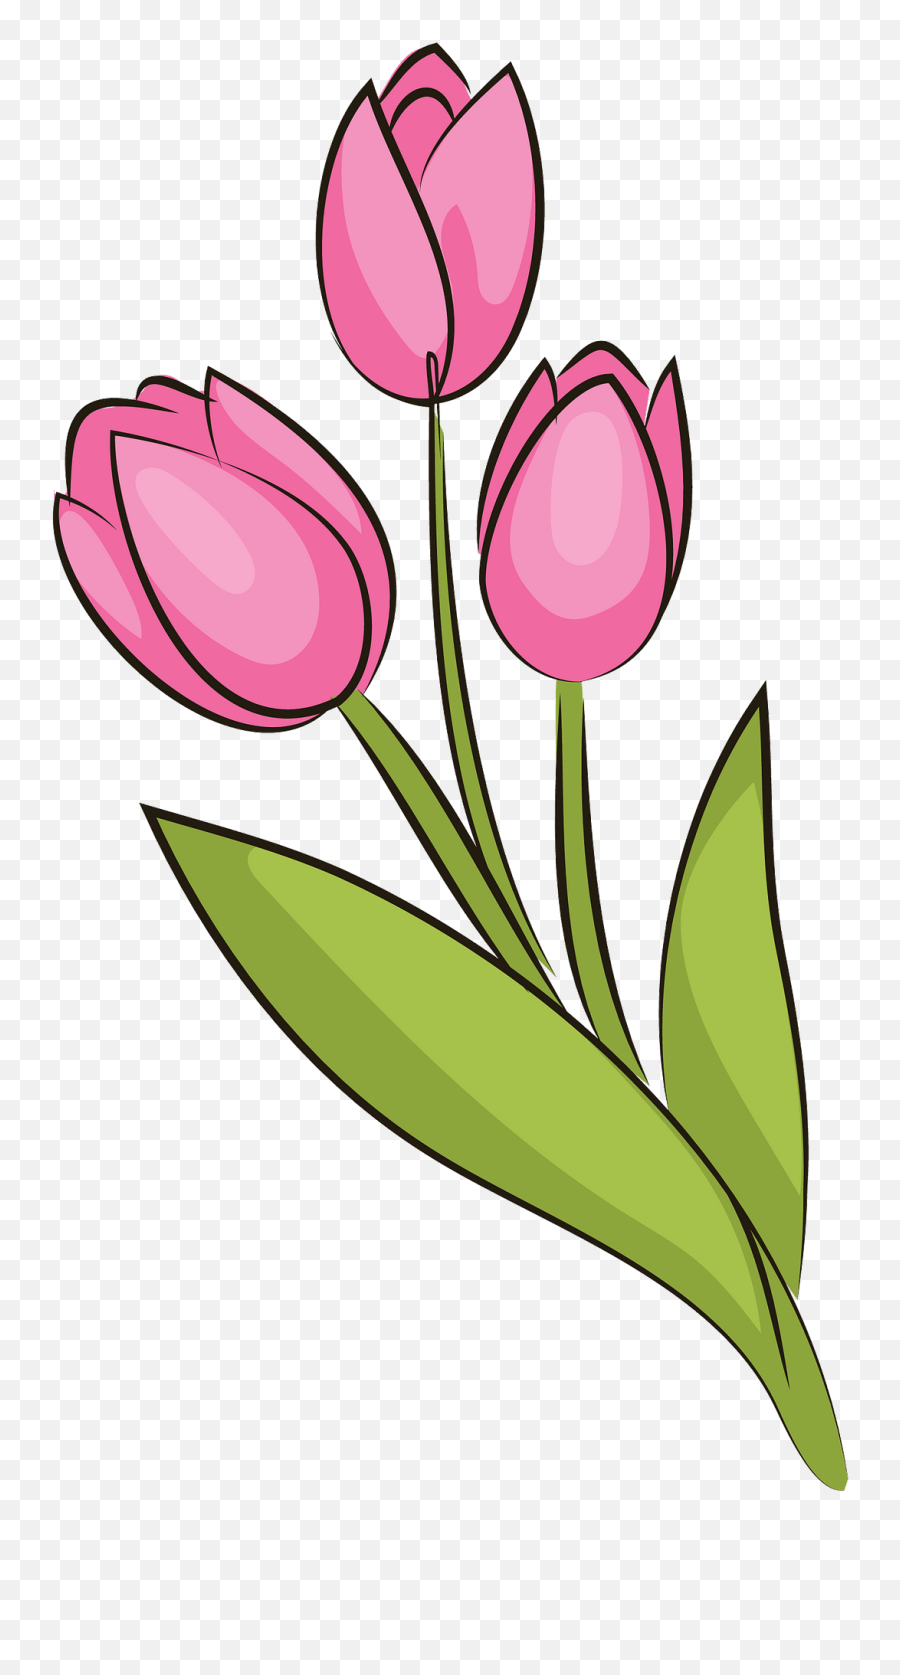 Bouquet Of Tulips Clipart - Tulips Clipart Png Download Tulips Clipart,Tulips Png